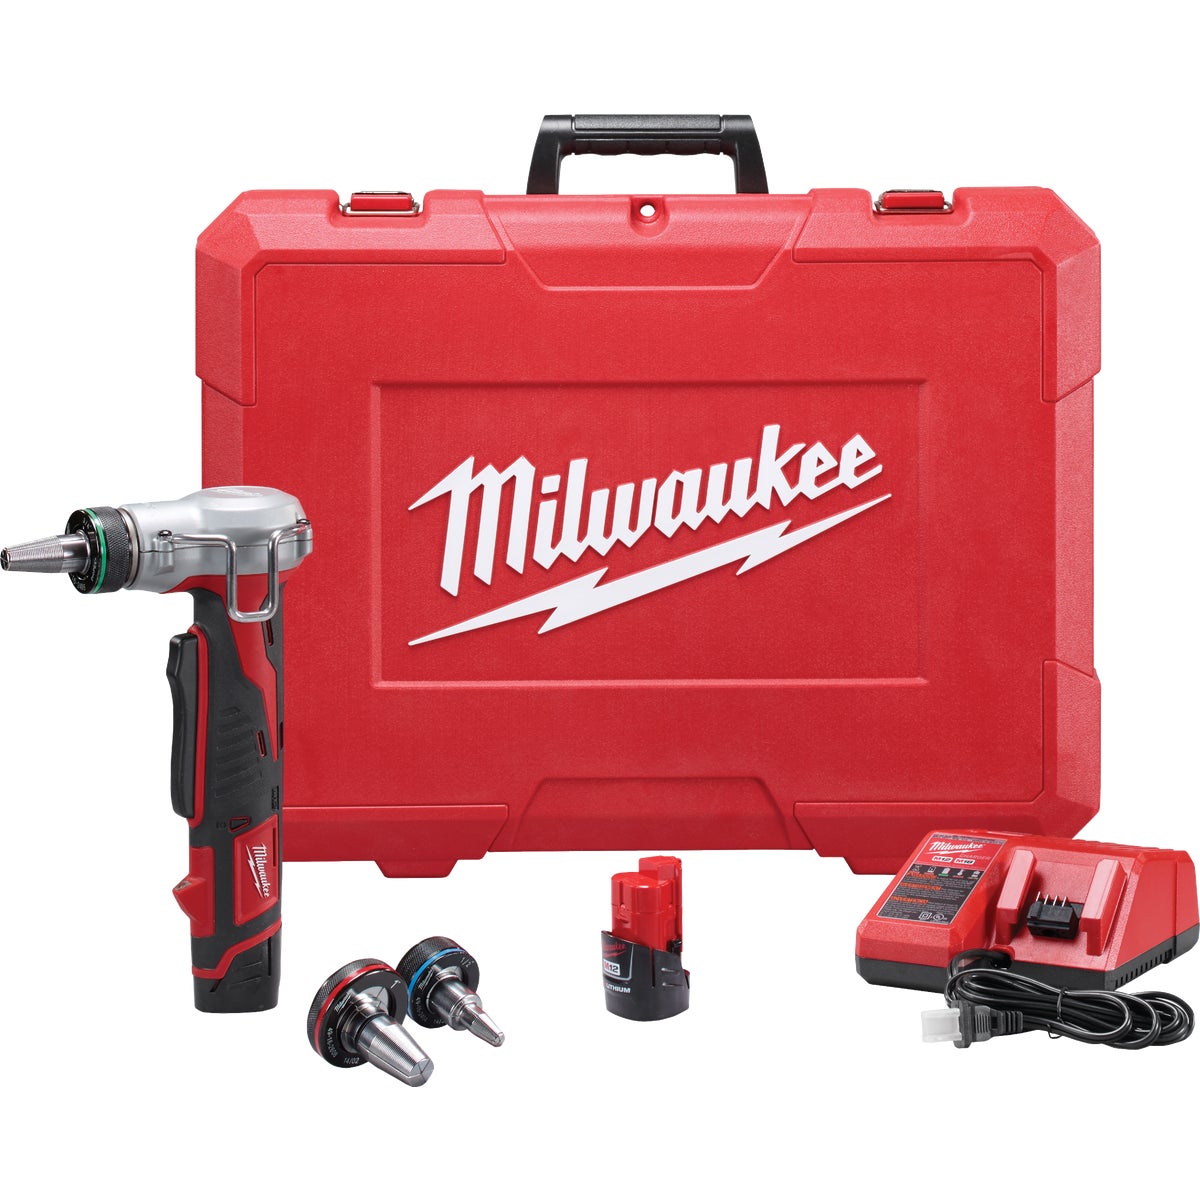 Item 405405, The M12 Cordless Lithium-Ion expansion PEX tool features an auto-rotating 